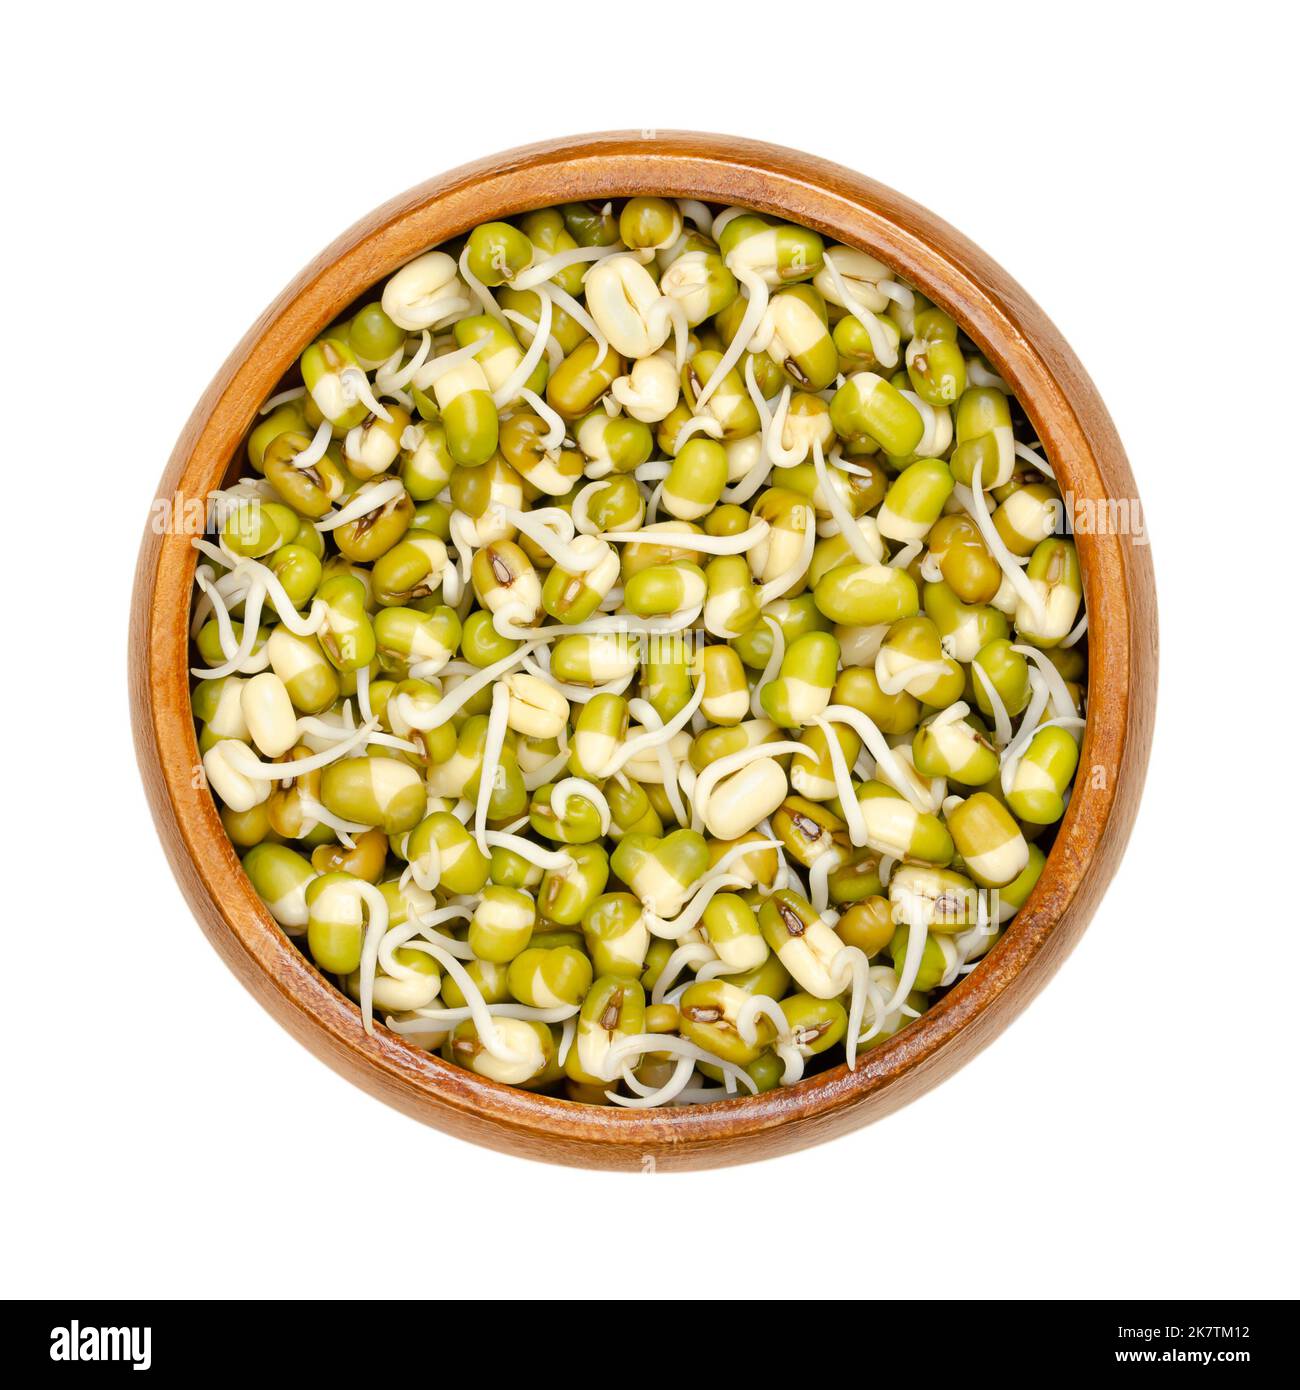 Sprouted mung beans in wooden bowl. Mung bean sprouts, vegetable, grown by sprouting Vigna radiata, also known as green gram, maash, monggo or munggo. Stock Photo